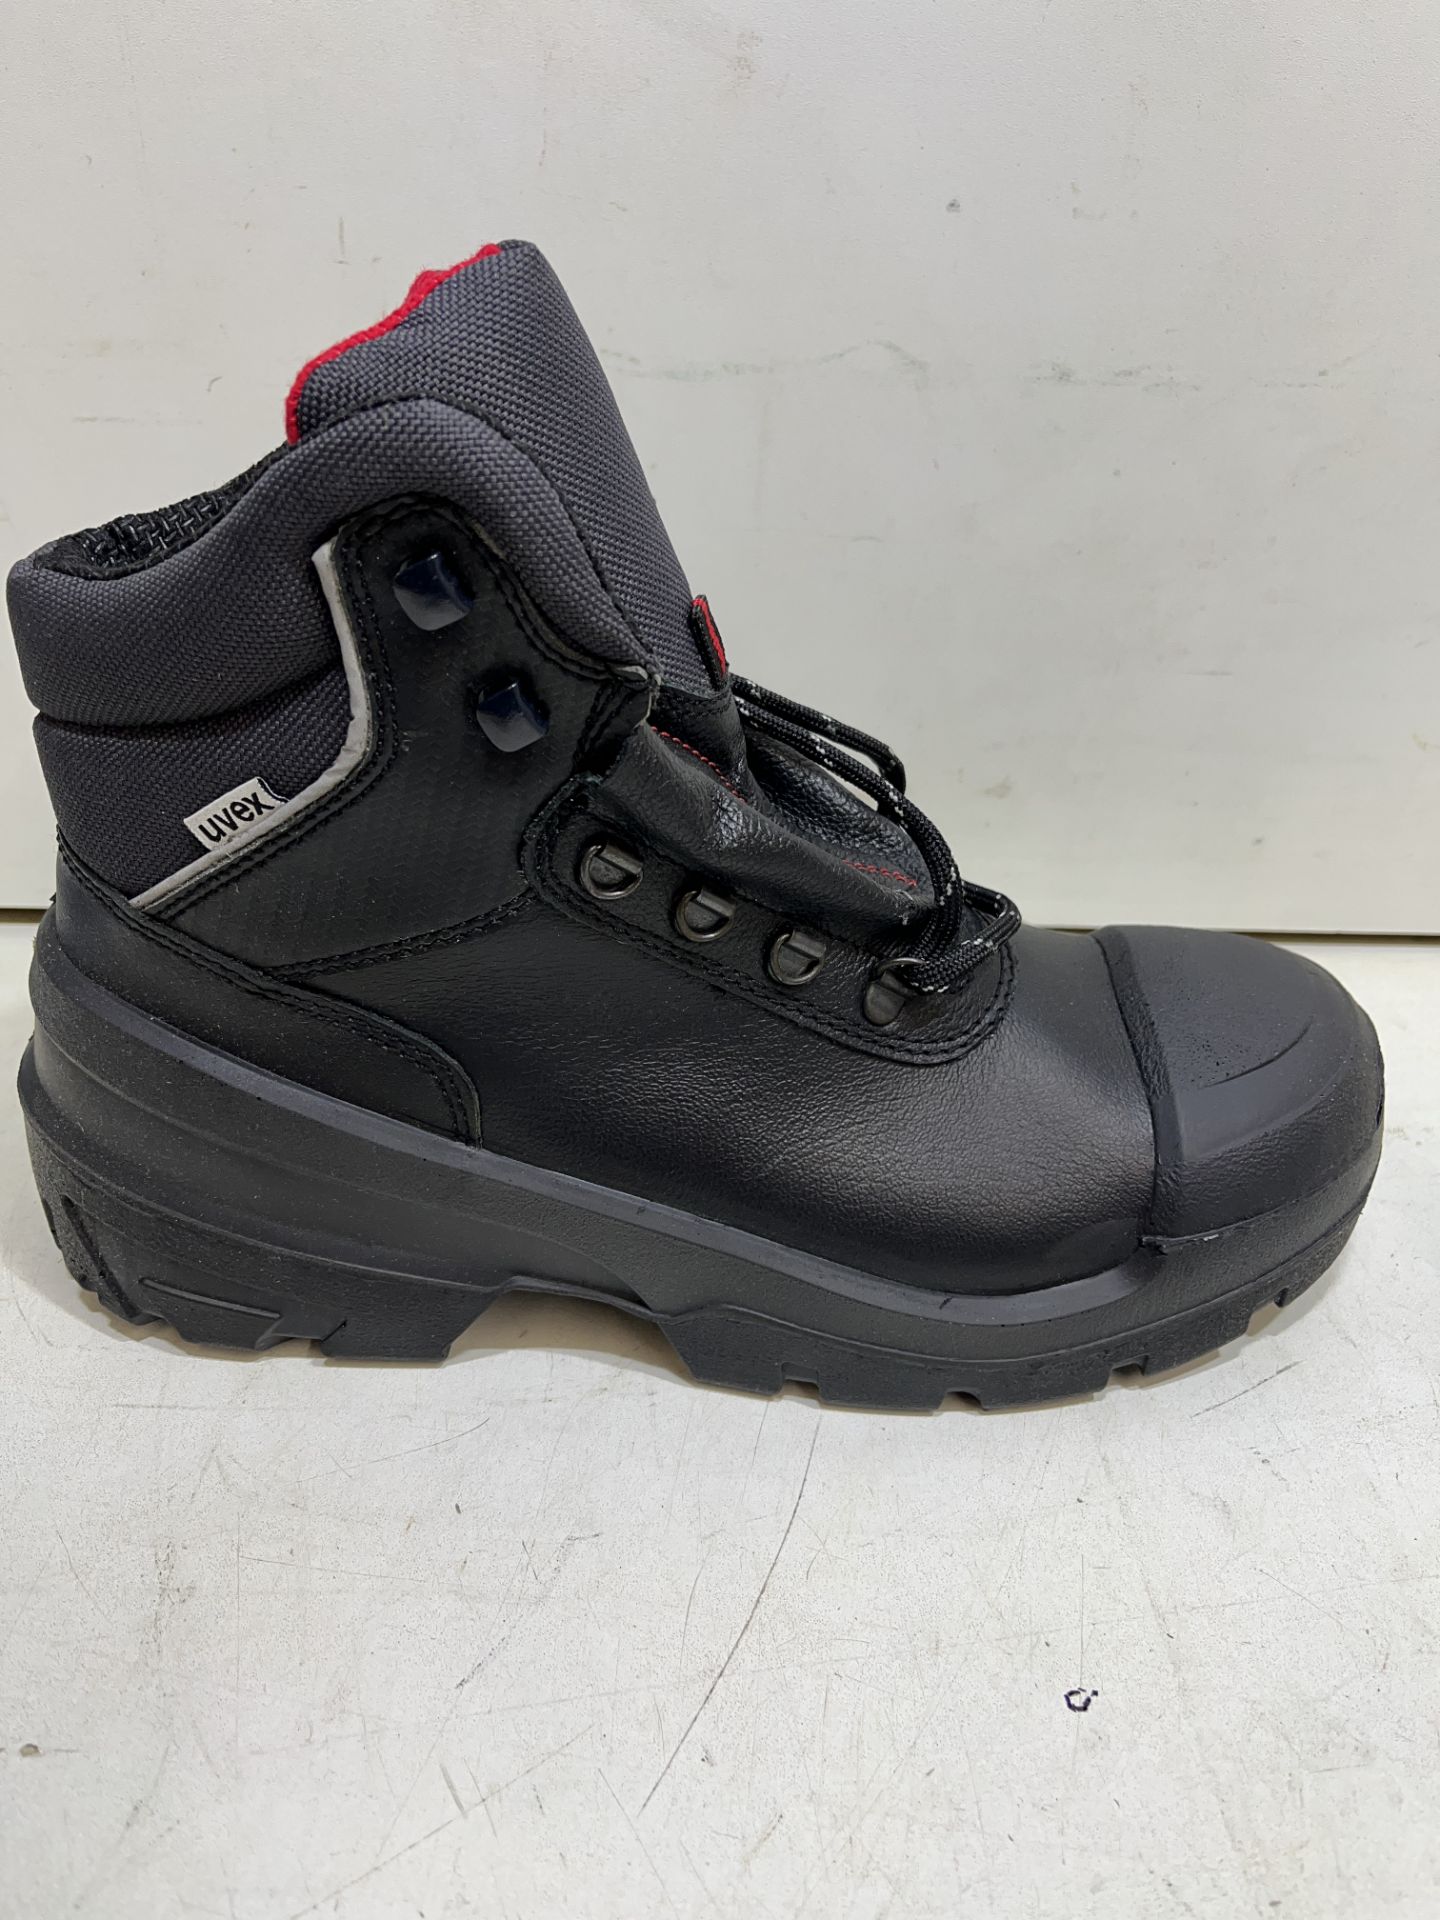 Uvex Safety Boots | UK 9 - Image 2 of 4